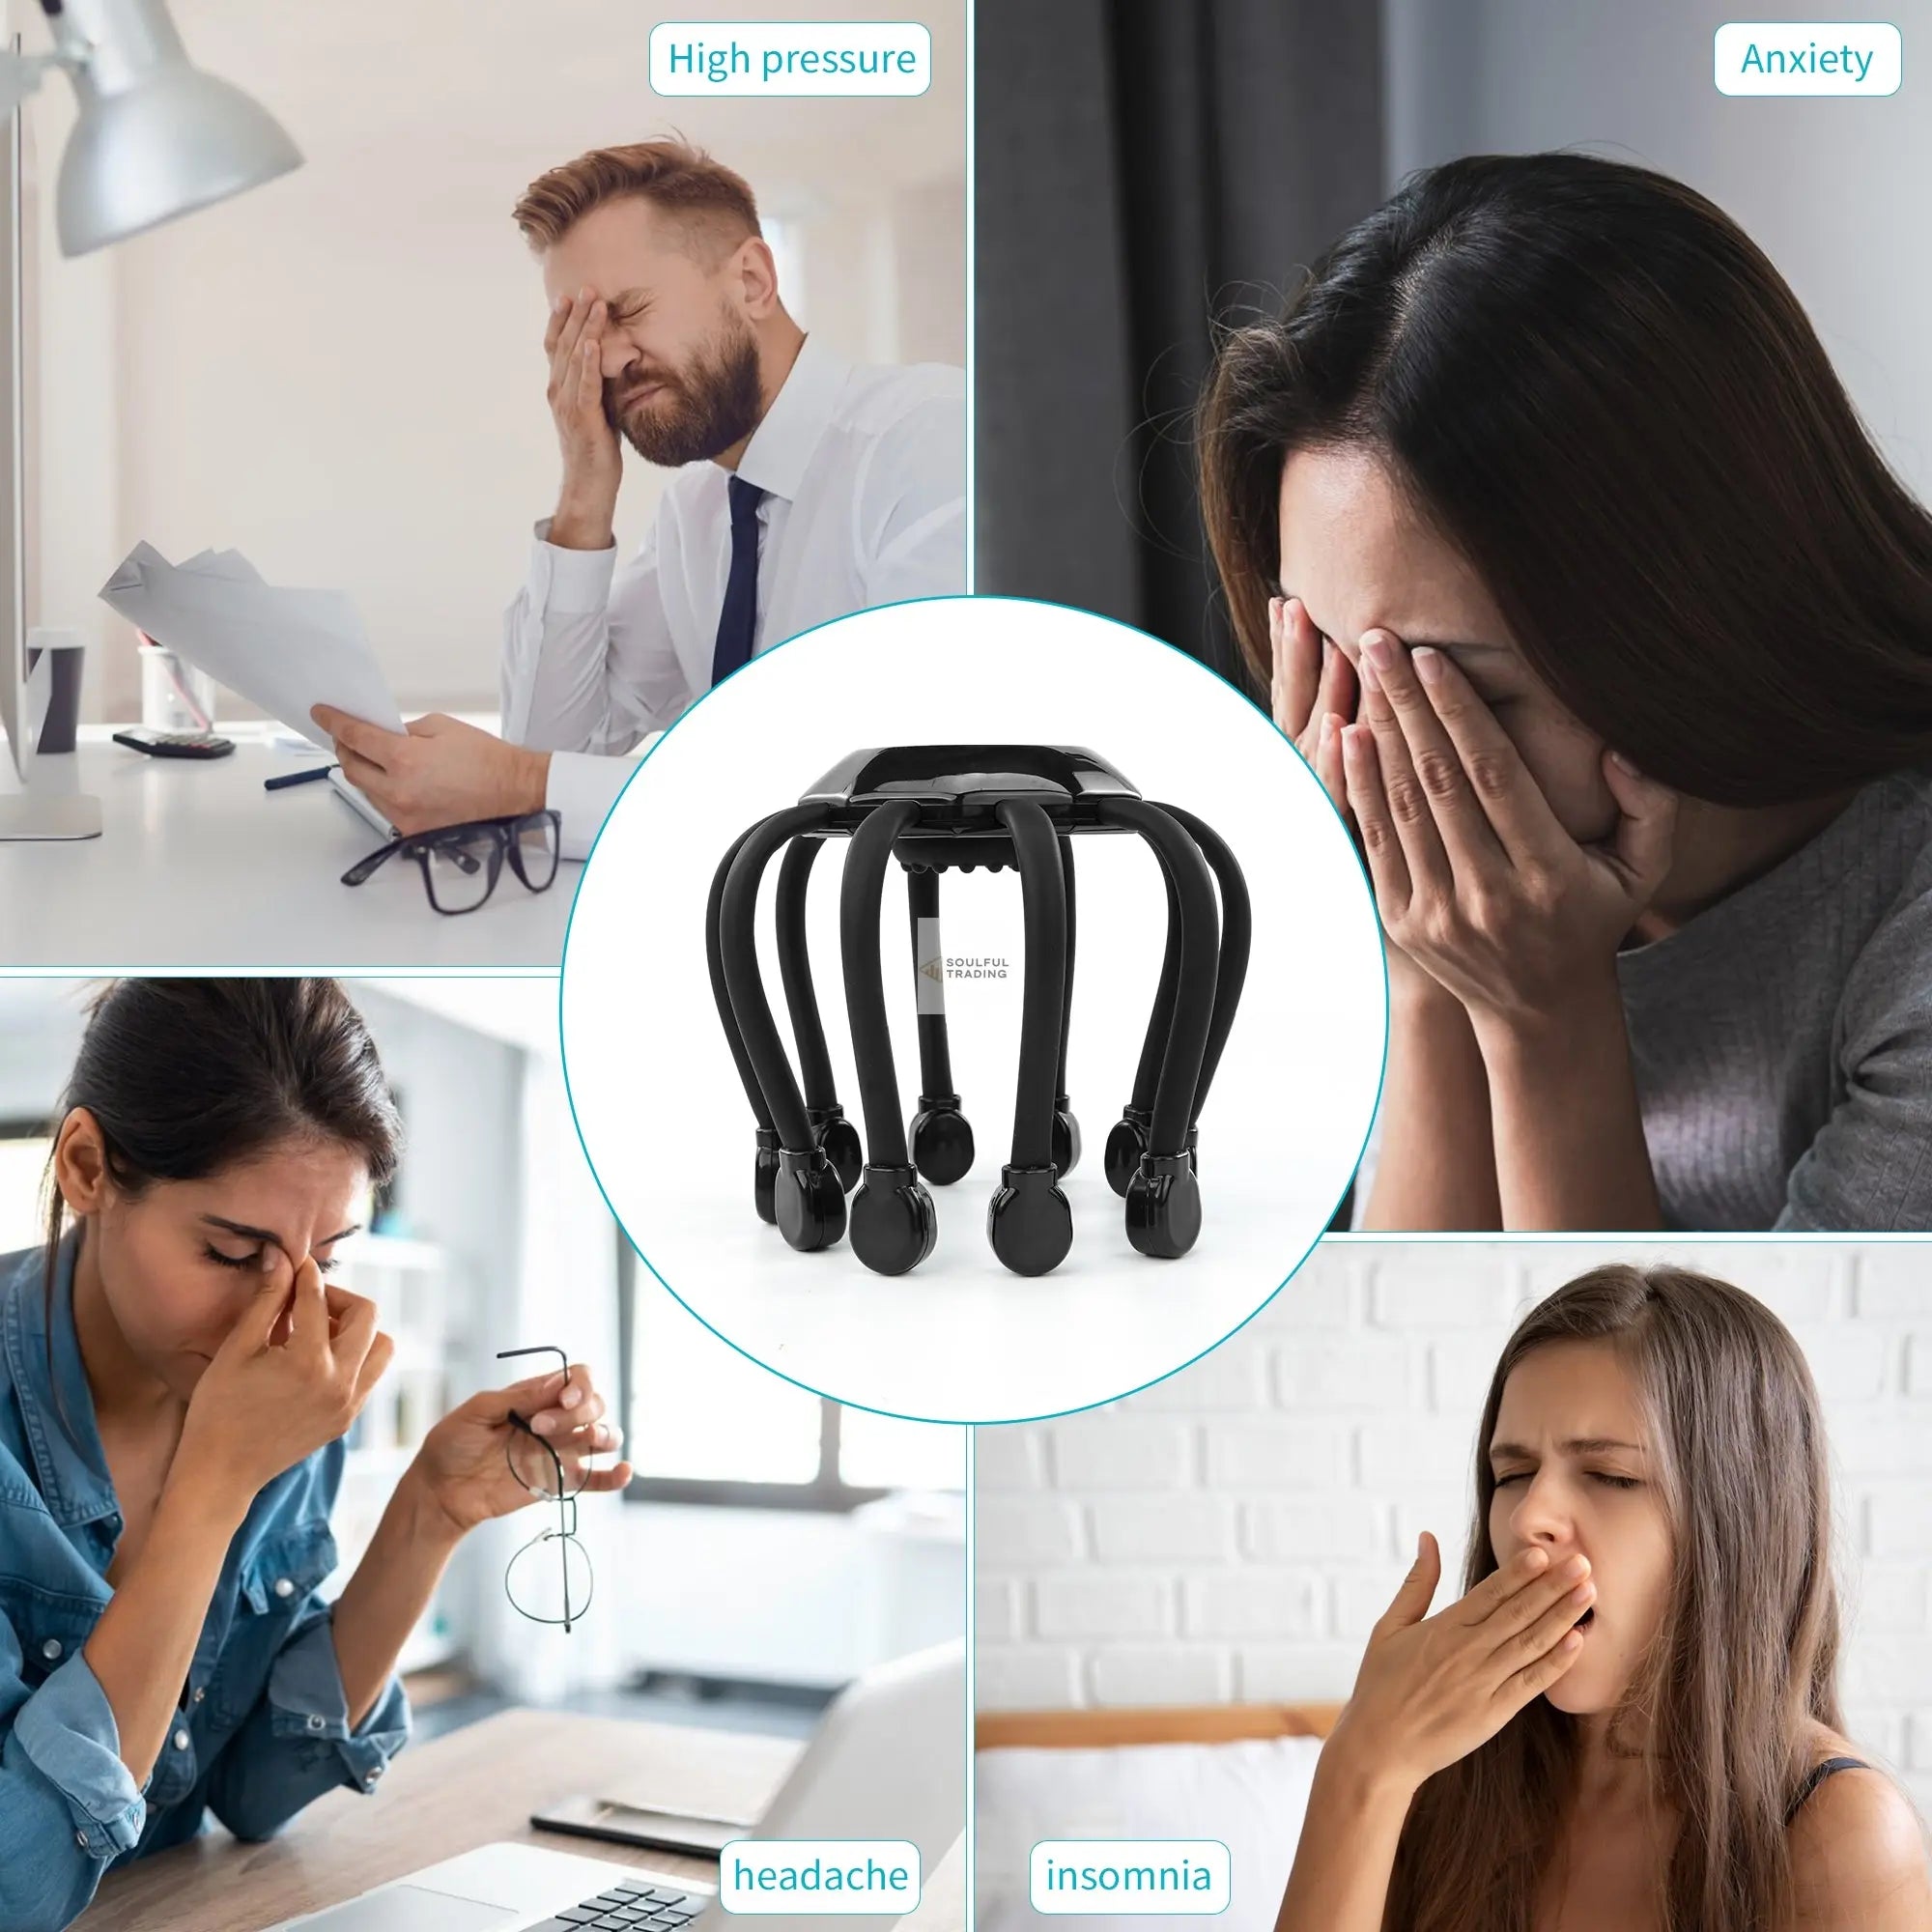 Collage illustrating symptoms of stress including a man experiencing high pressure, a woman with anxiety, another using the Soulful Trading Ultra Scalp Massager for her headache, one showing insomnia, and a person yawning from fatigue.